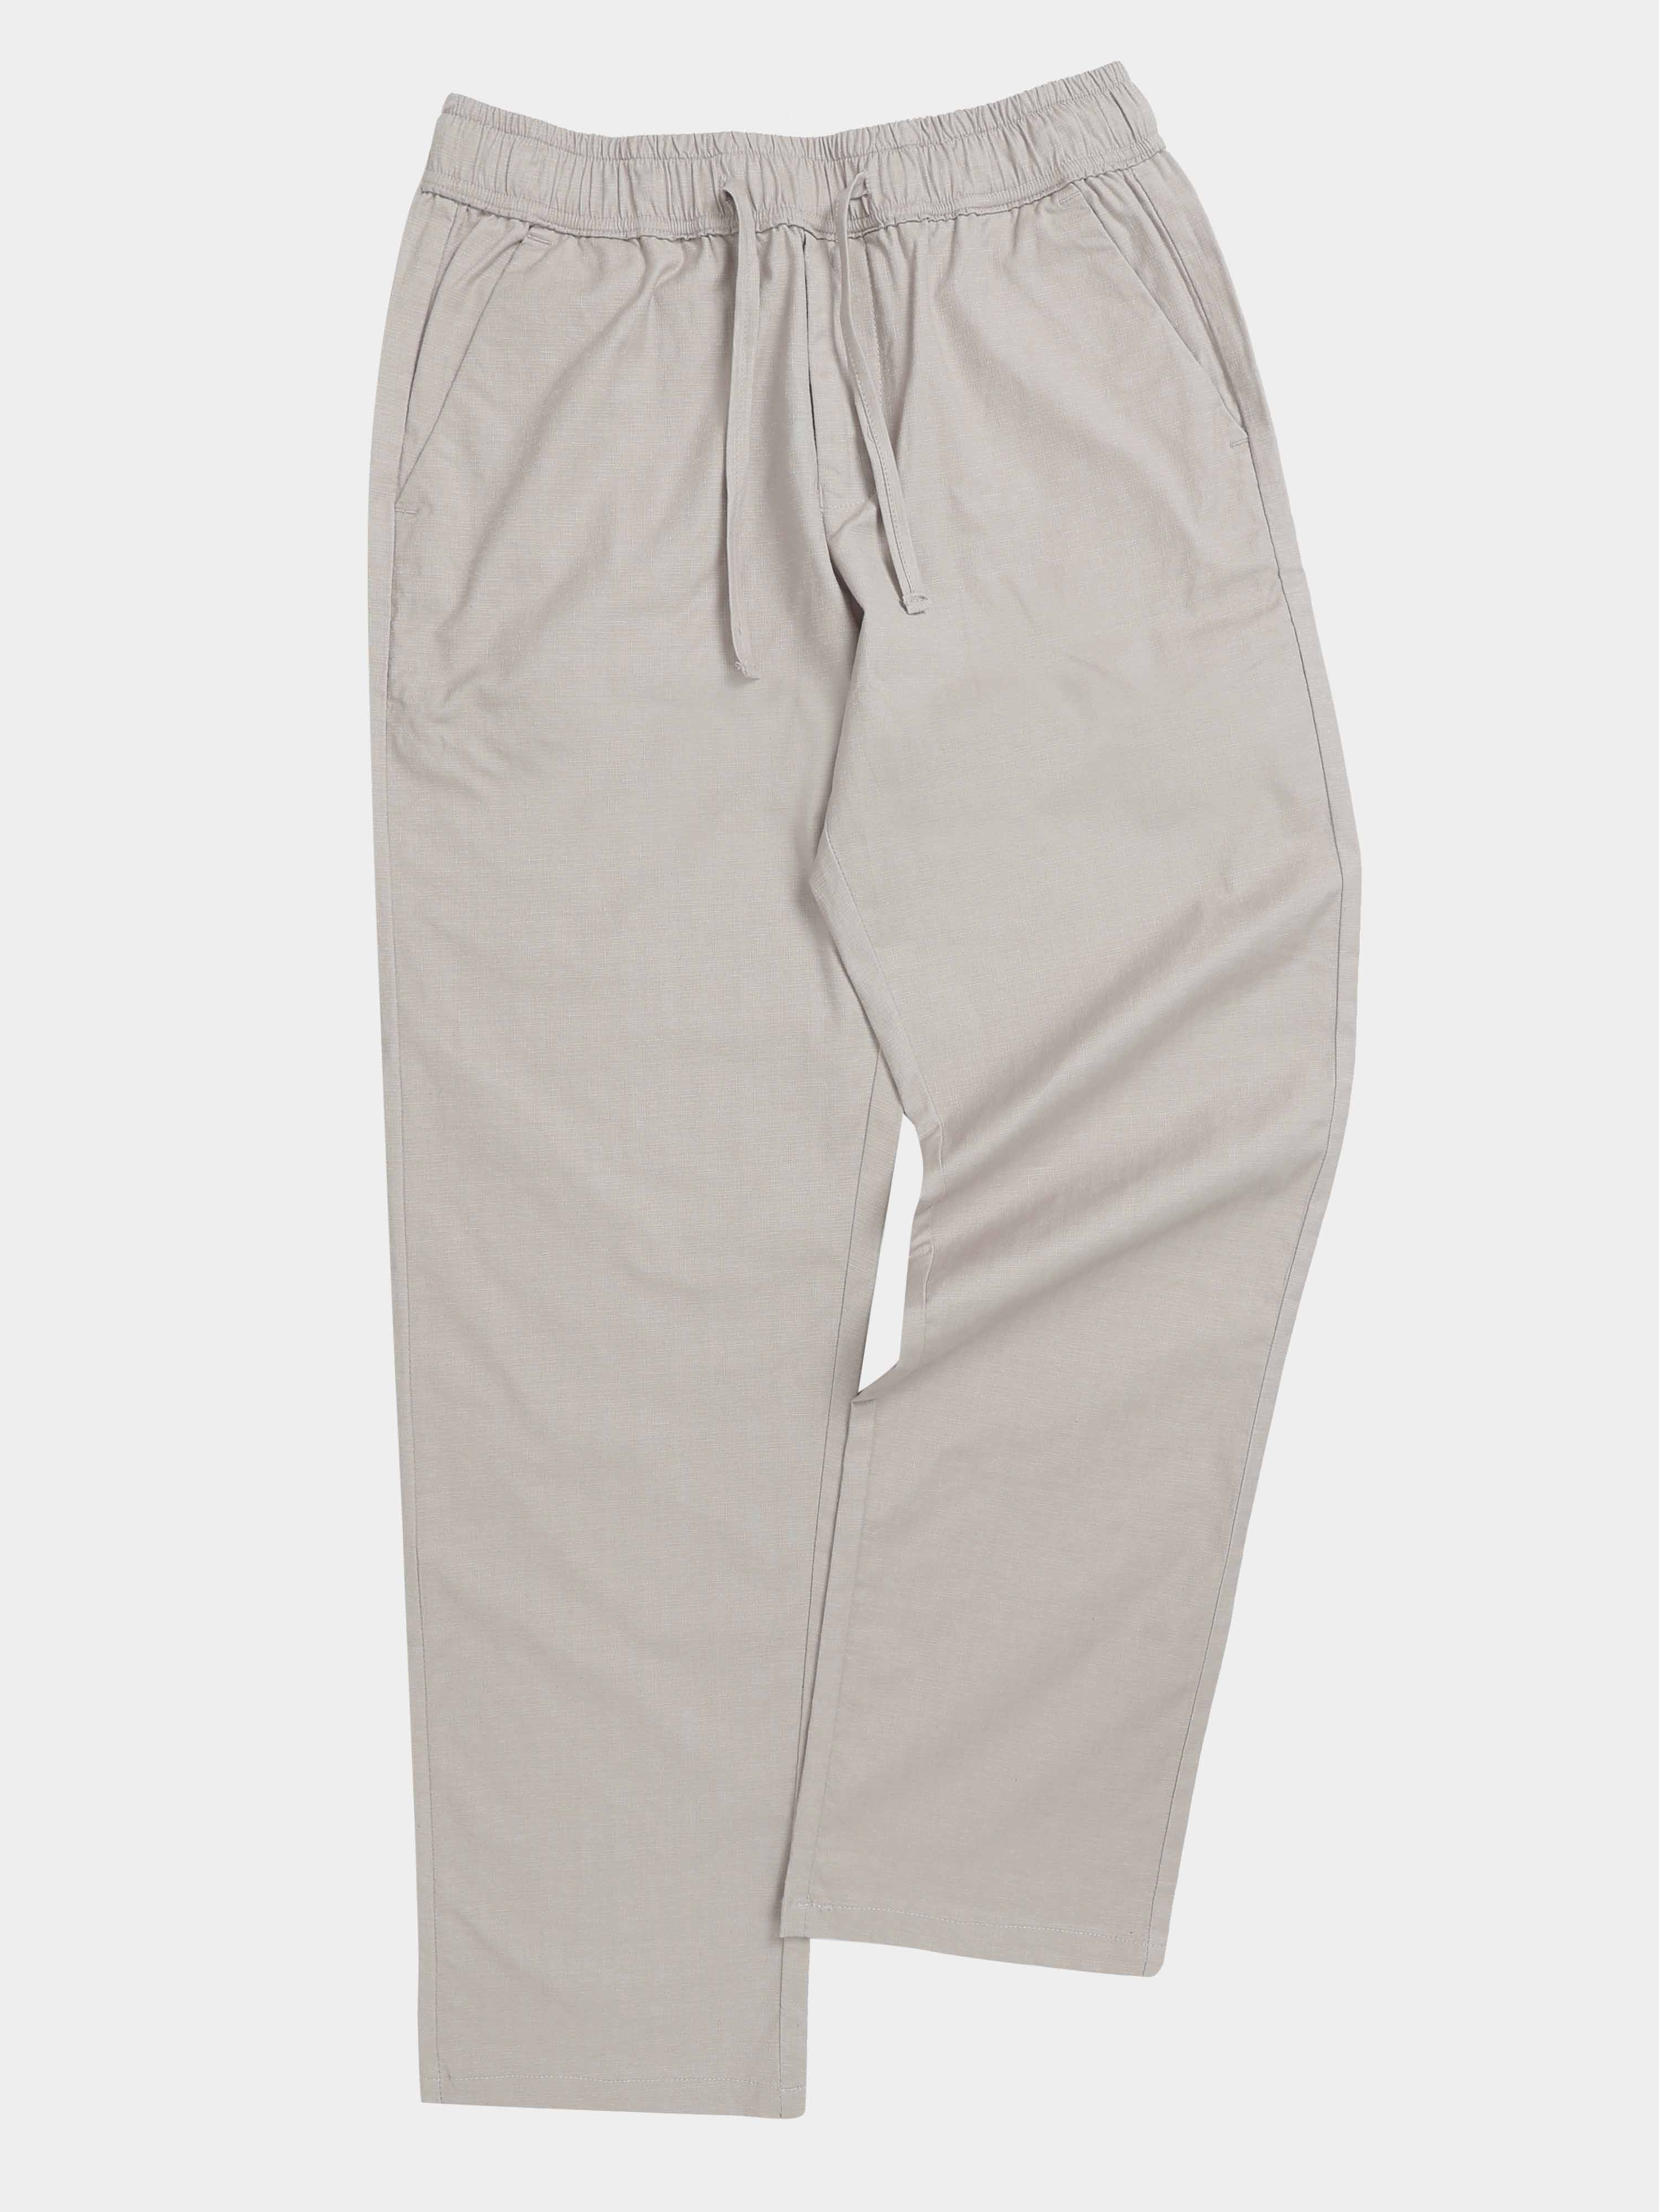 Verve Structural Beige Relaxed Pants